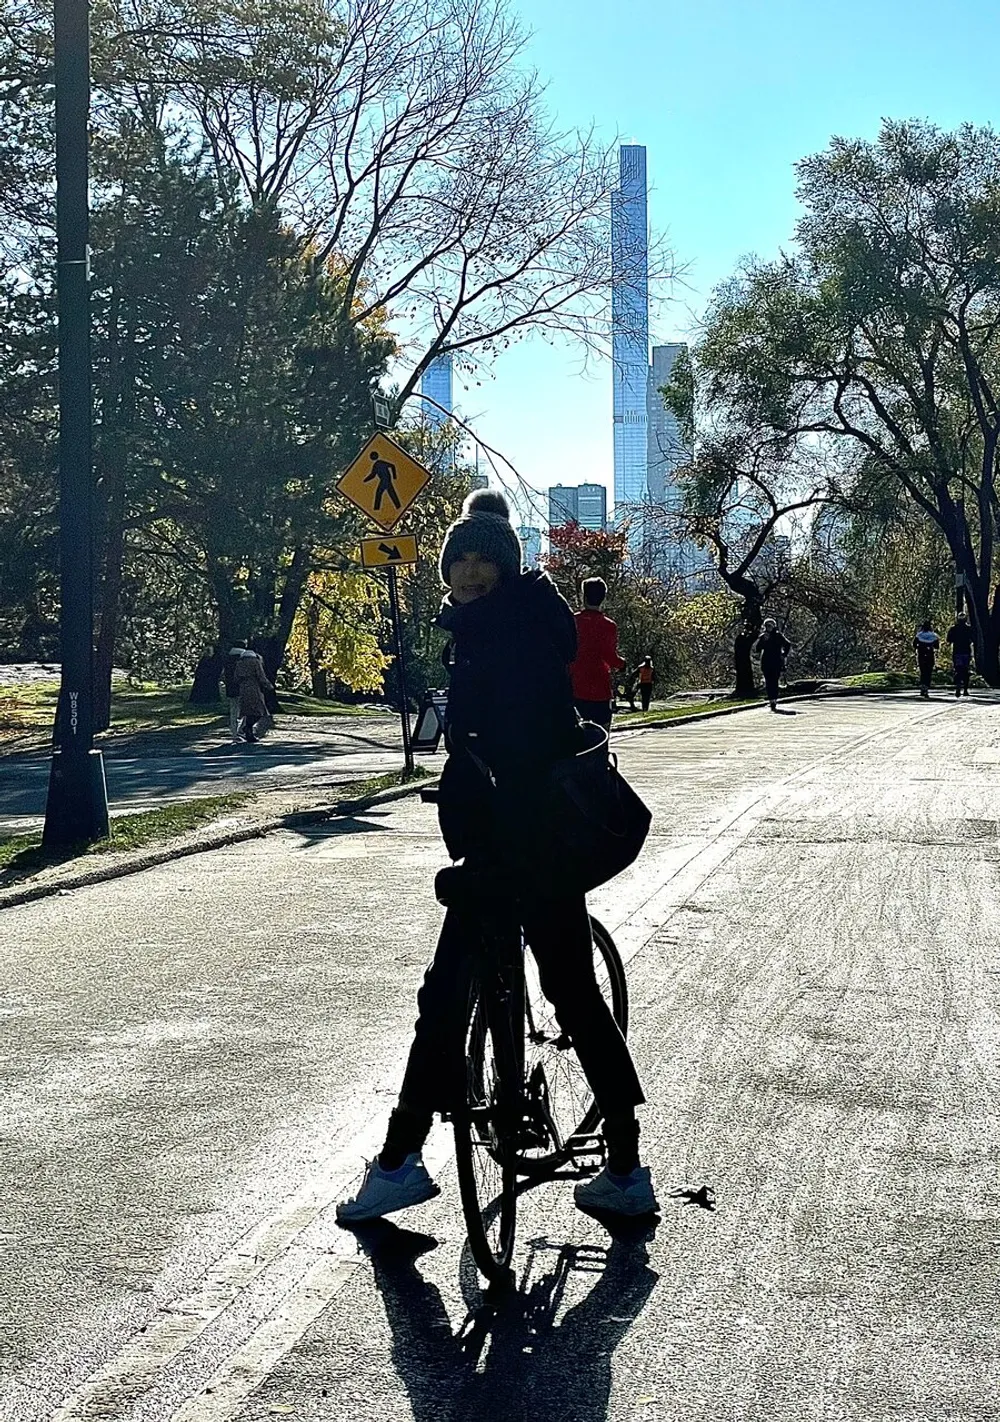 A person on a bicycle is silhouetted against a bright backdrop of trees and skyscrapers in what appears to be an urban park setting